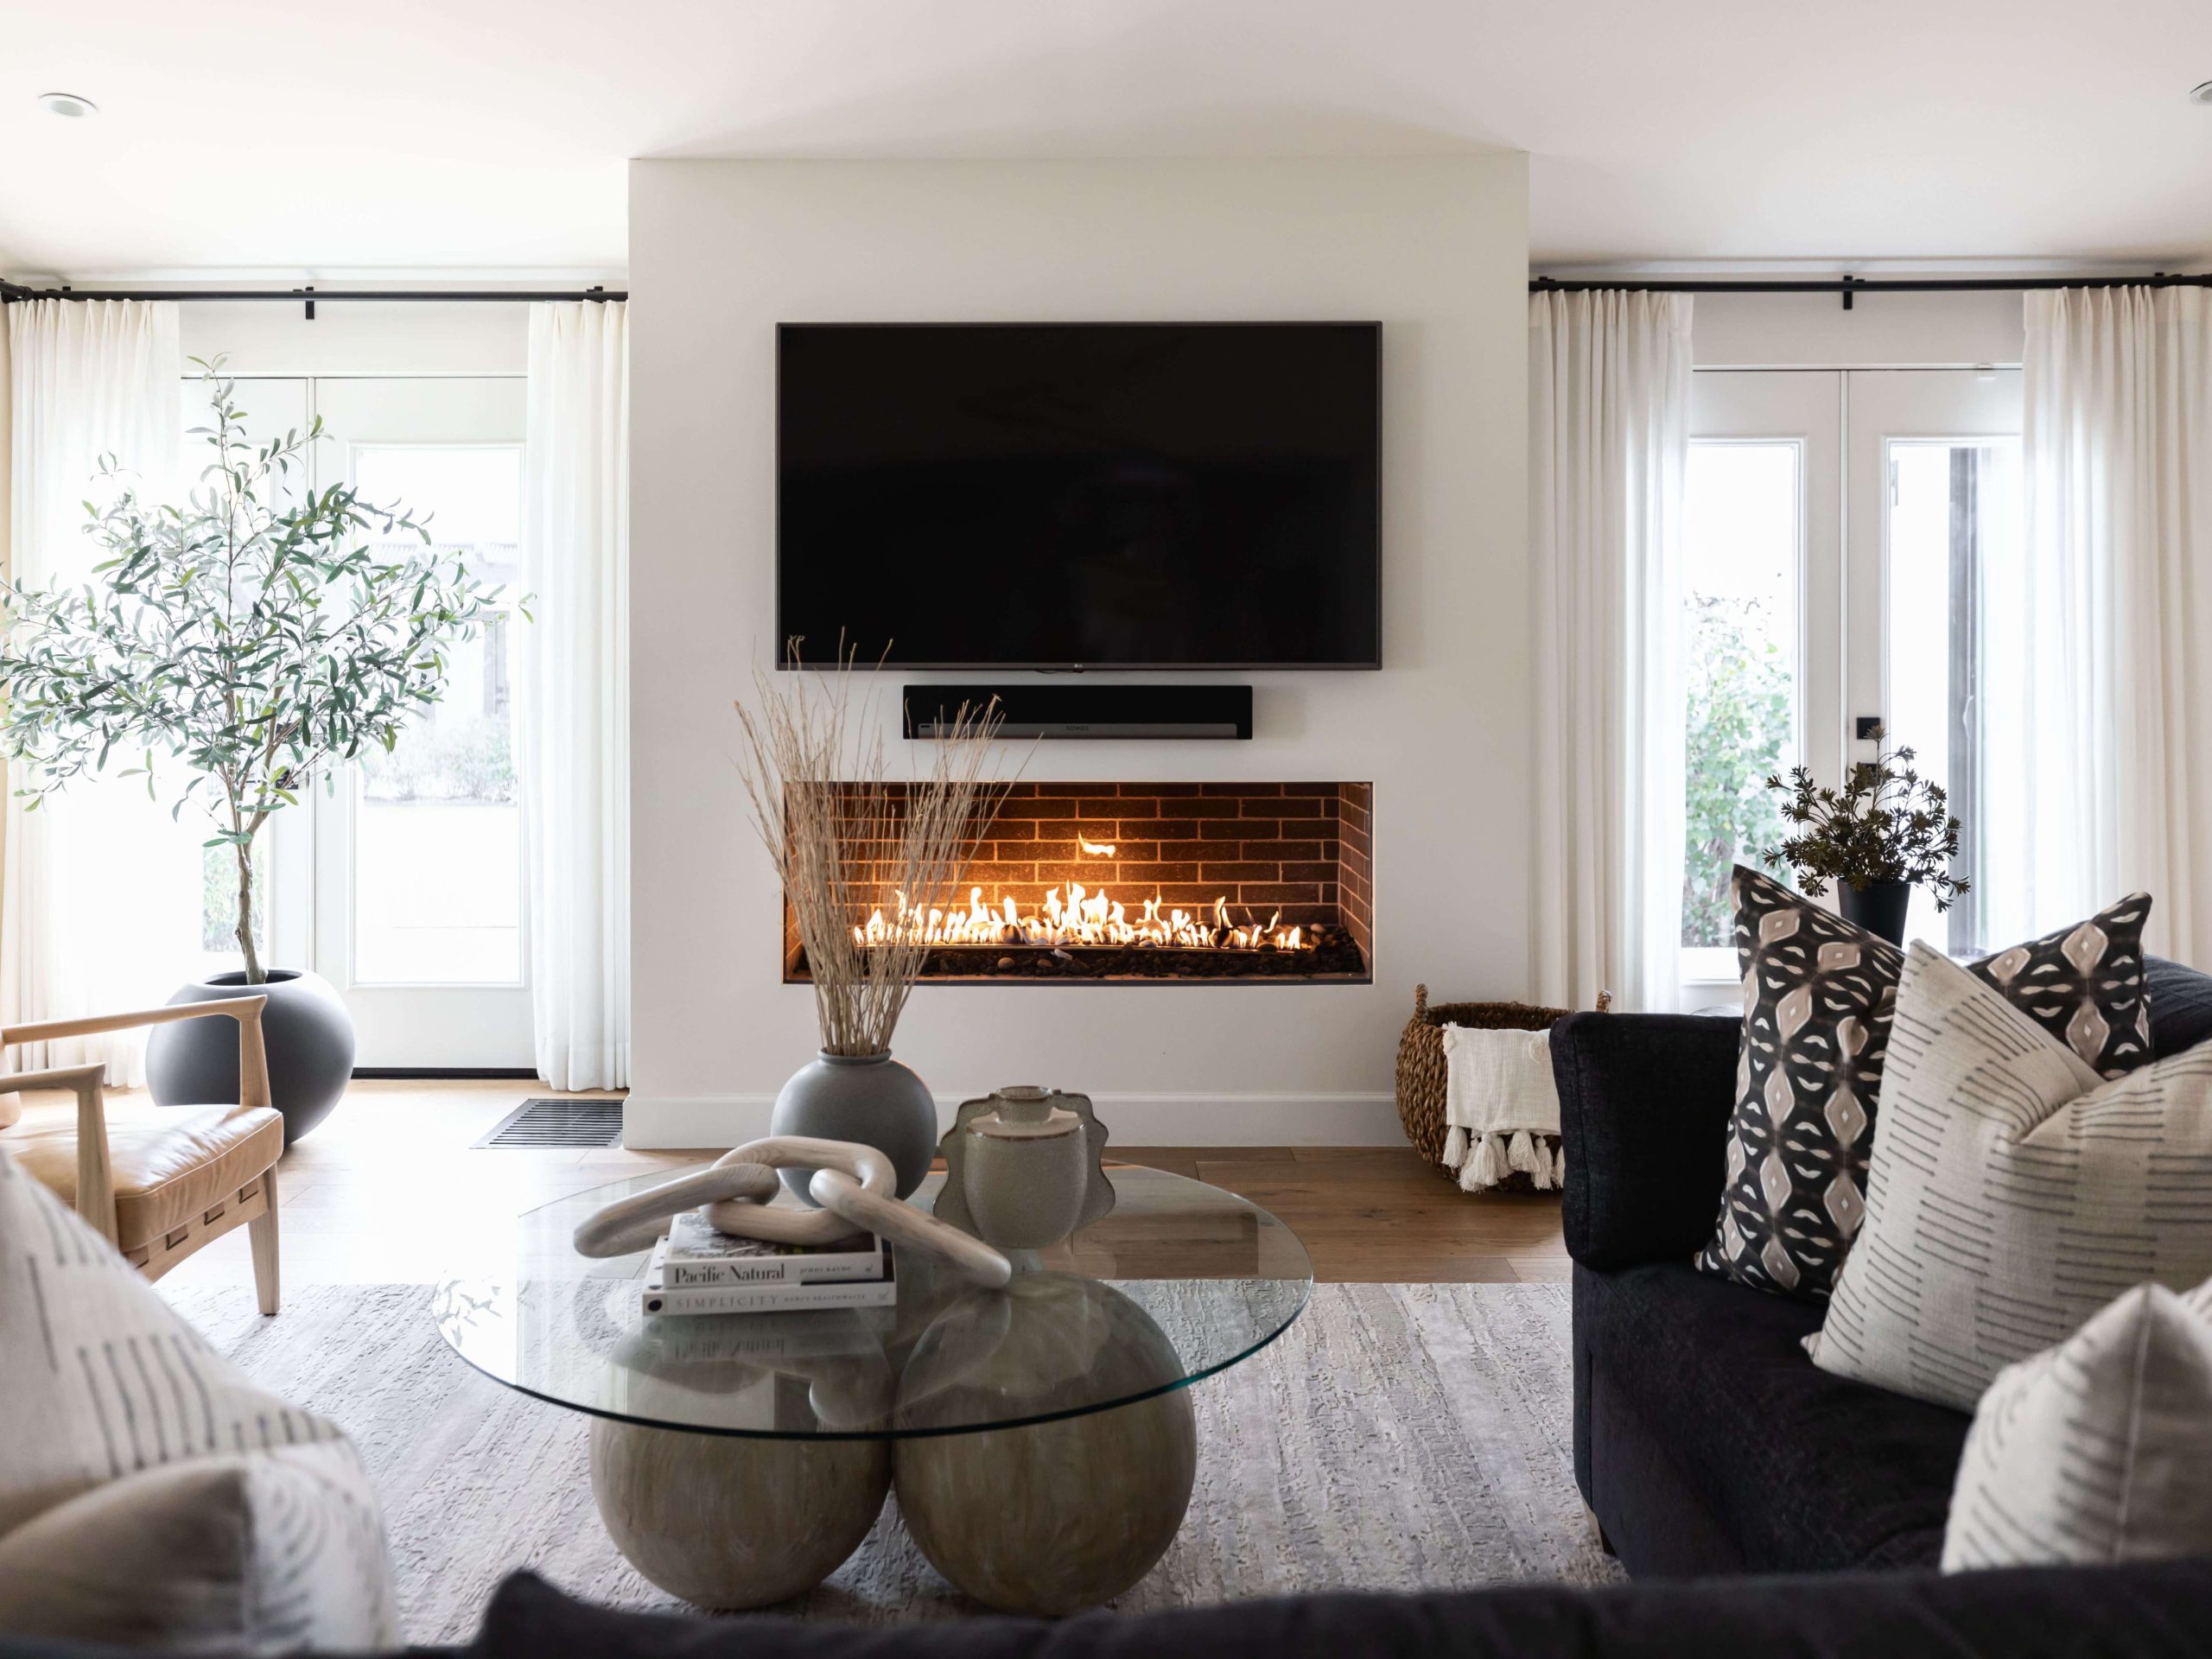 Cozy Living Room Ideas From Designers on How to Make Your